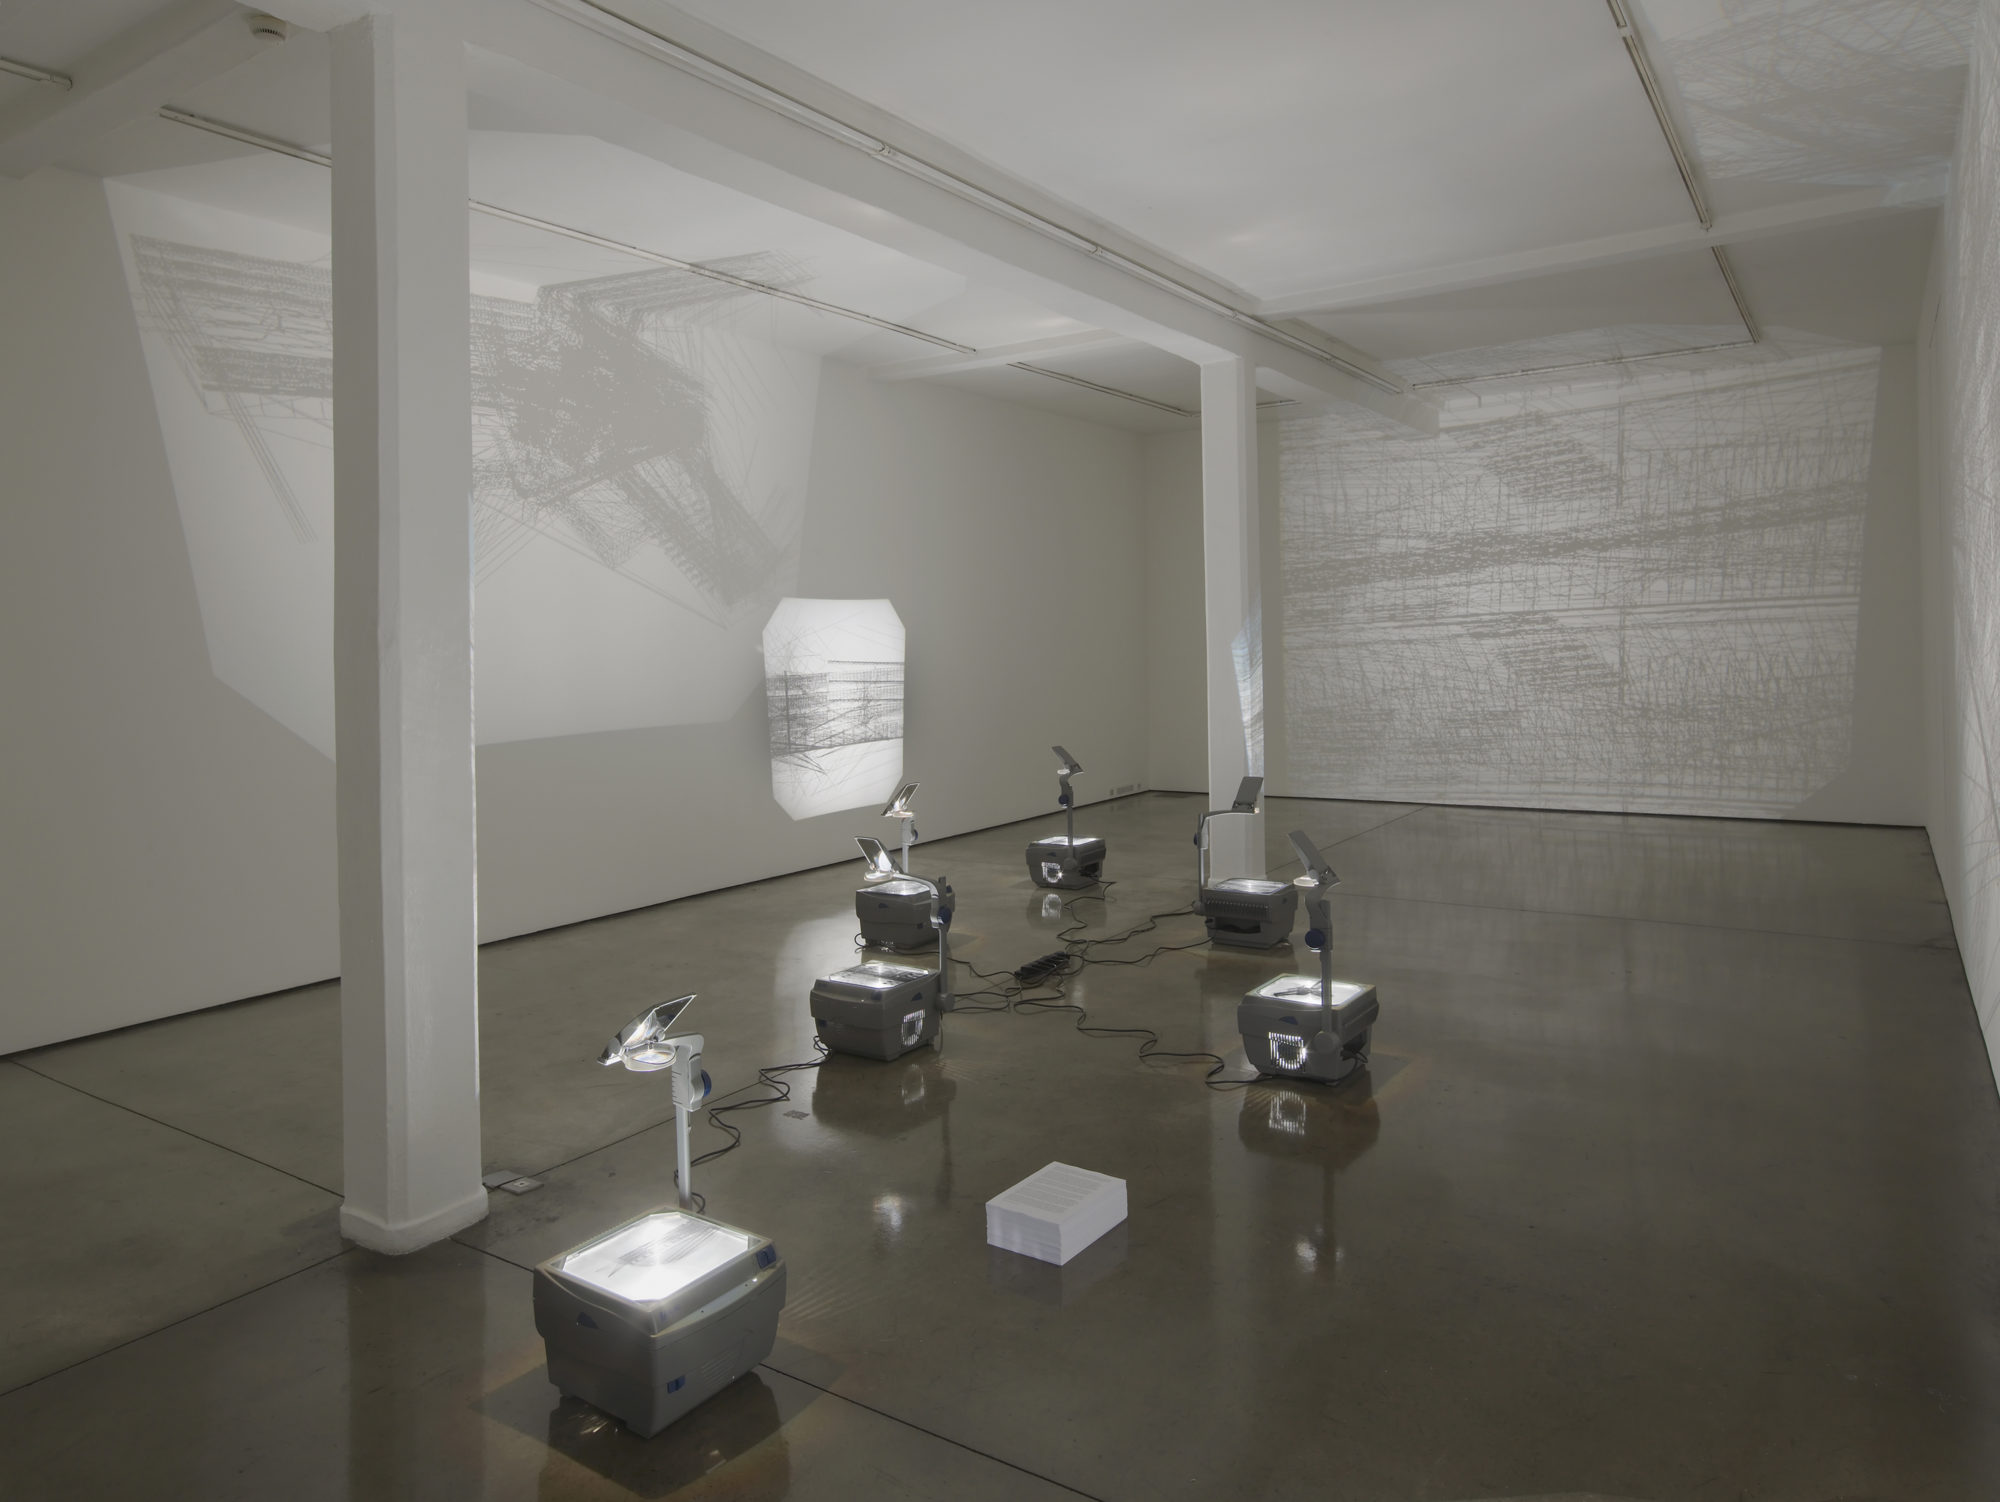 Multiple single image projectors sitting in a gallery space, displaying black and white architectural cad images.